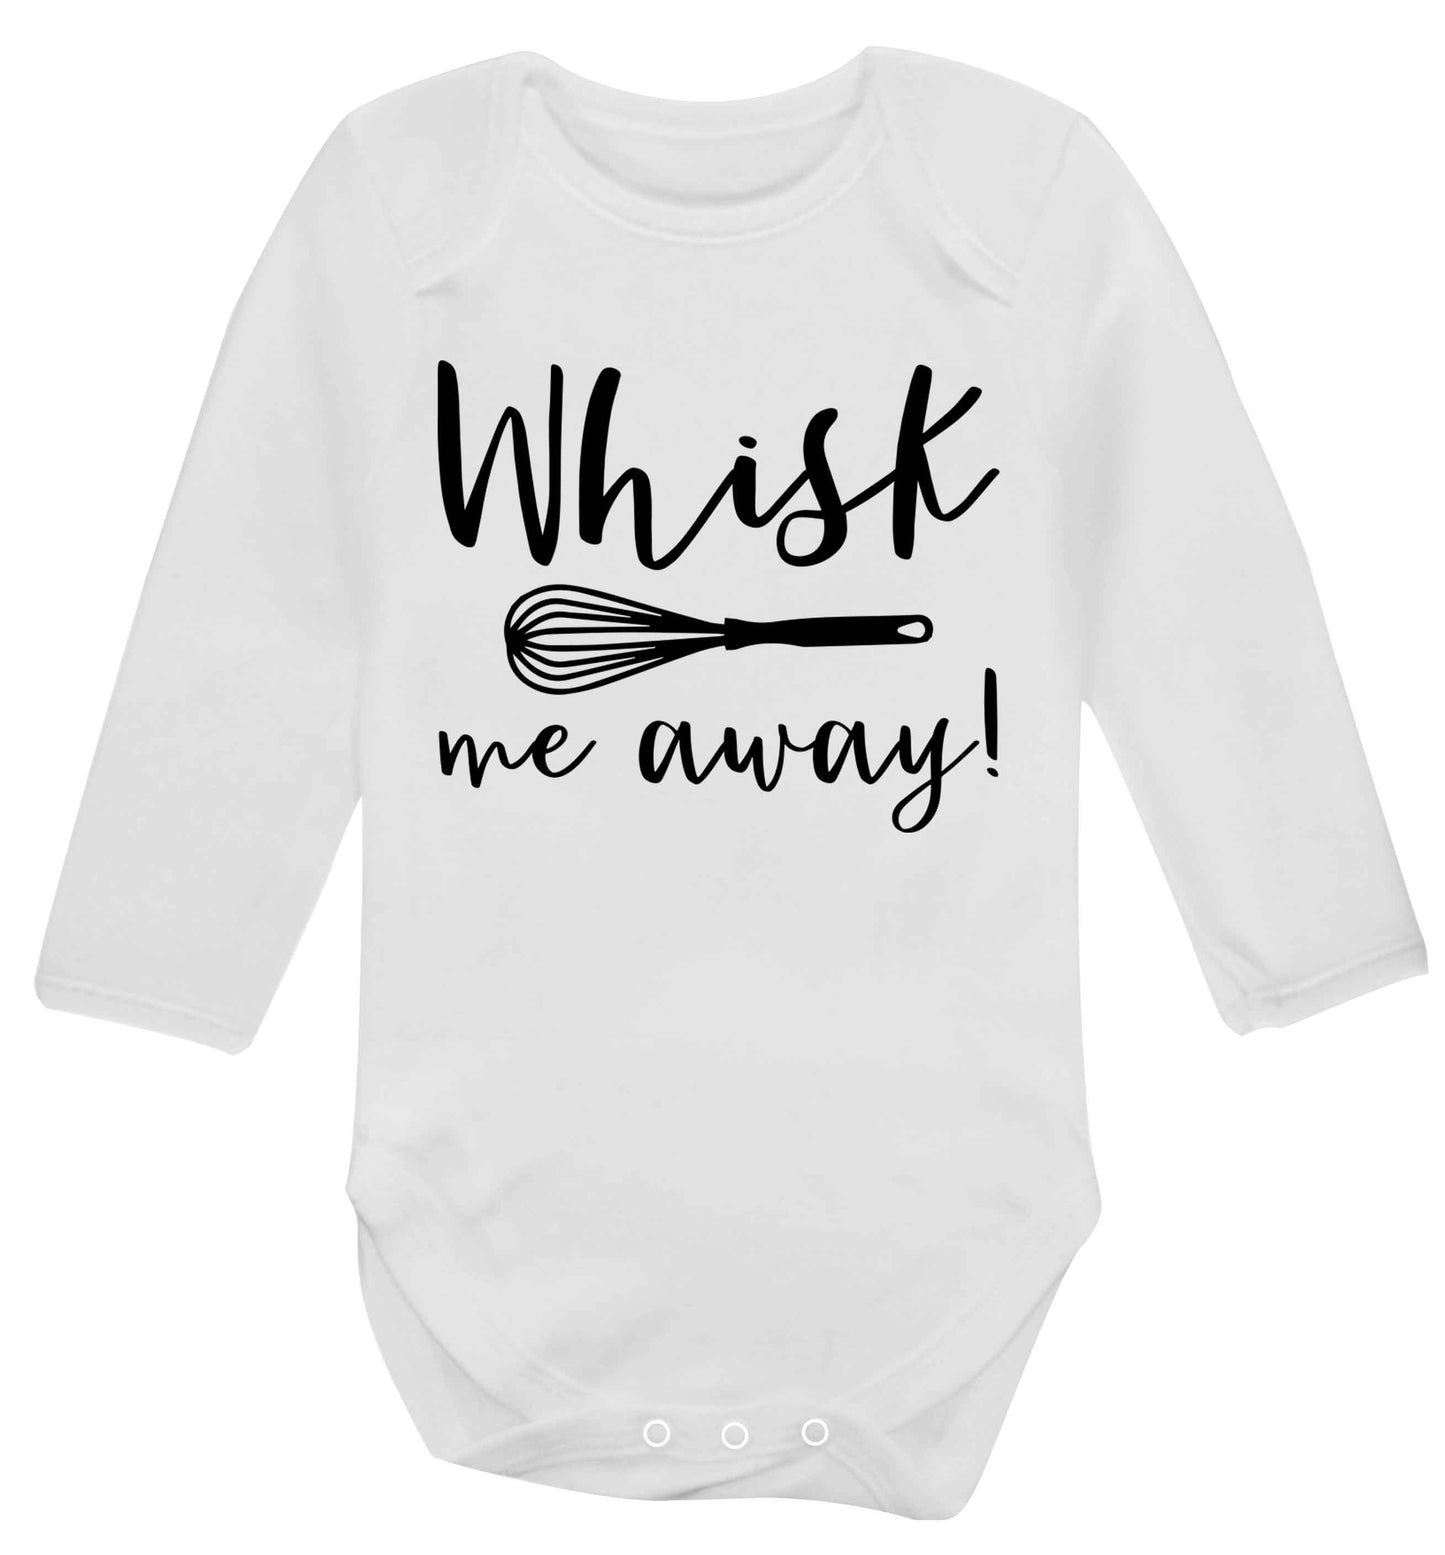 Whisk me away Baby Vest long sleeved white 6-12 months